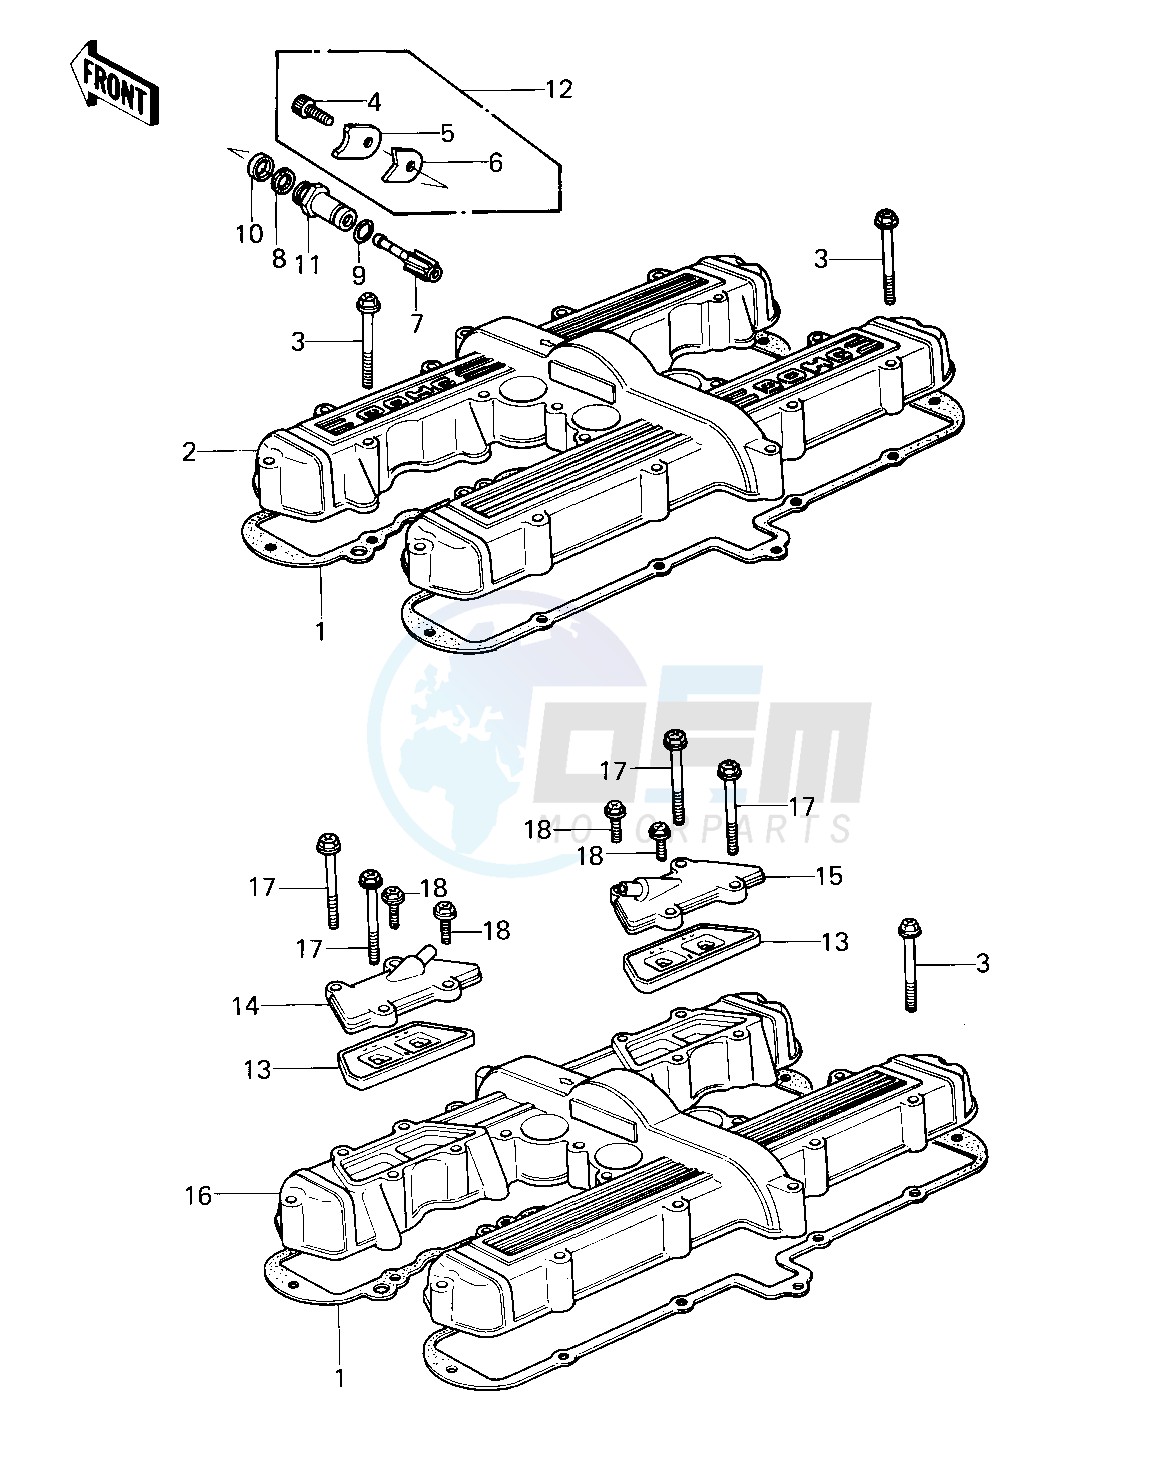 CYLINDER HEAD COVER -- 80 KZY 50-E1- - blueprint